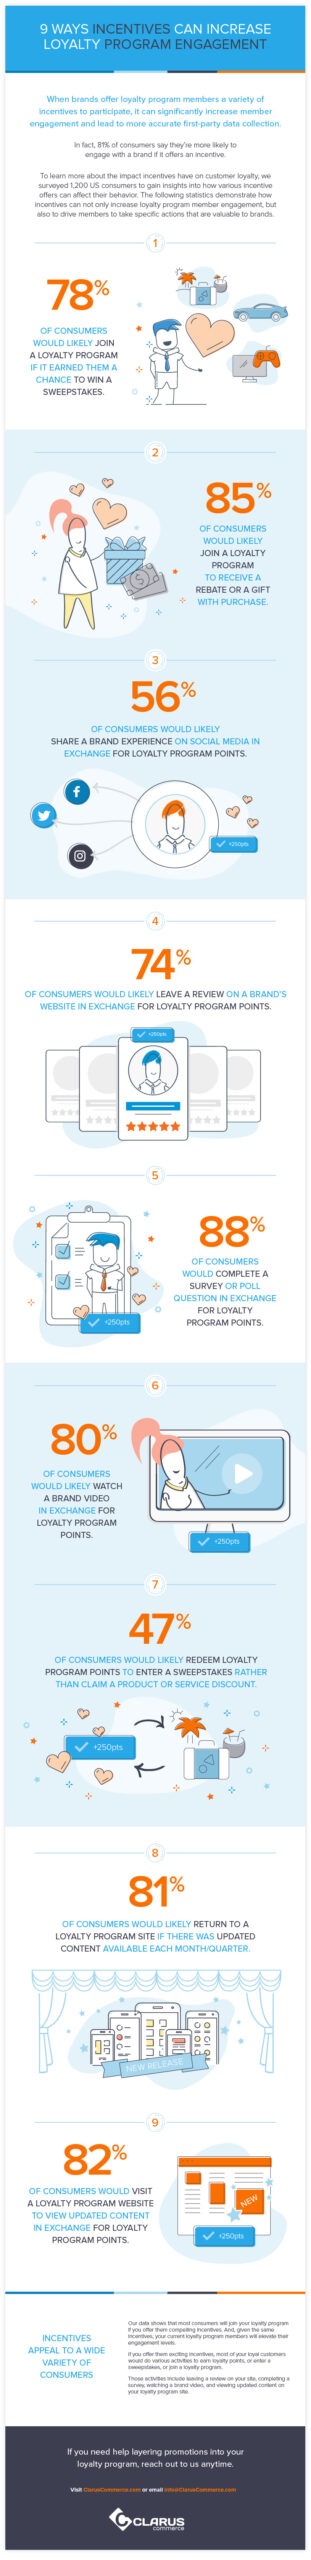 Can Offering Incentives Increase Loyalty Program Engagement? [Infographic] 